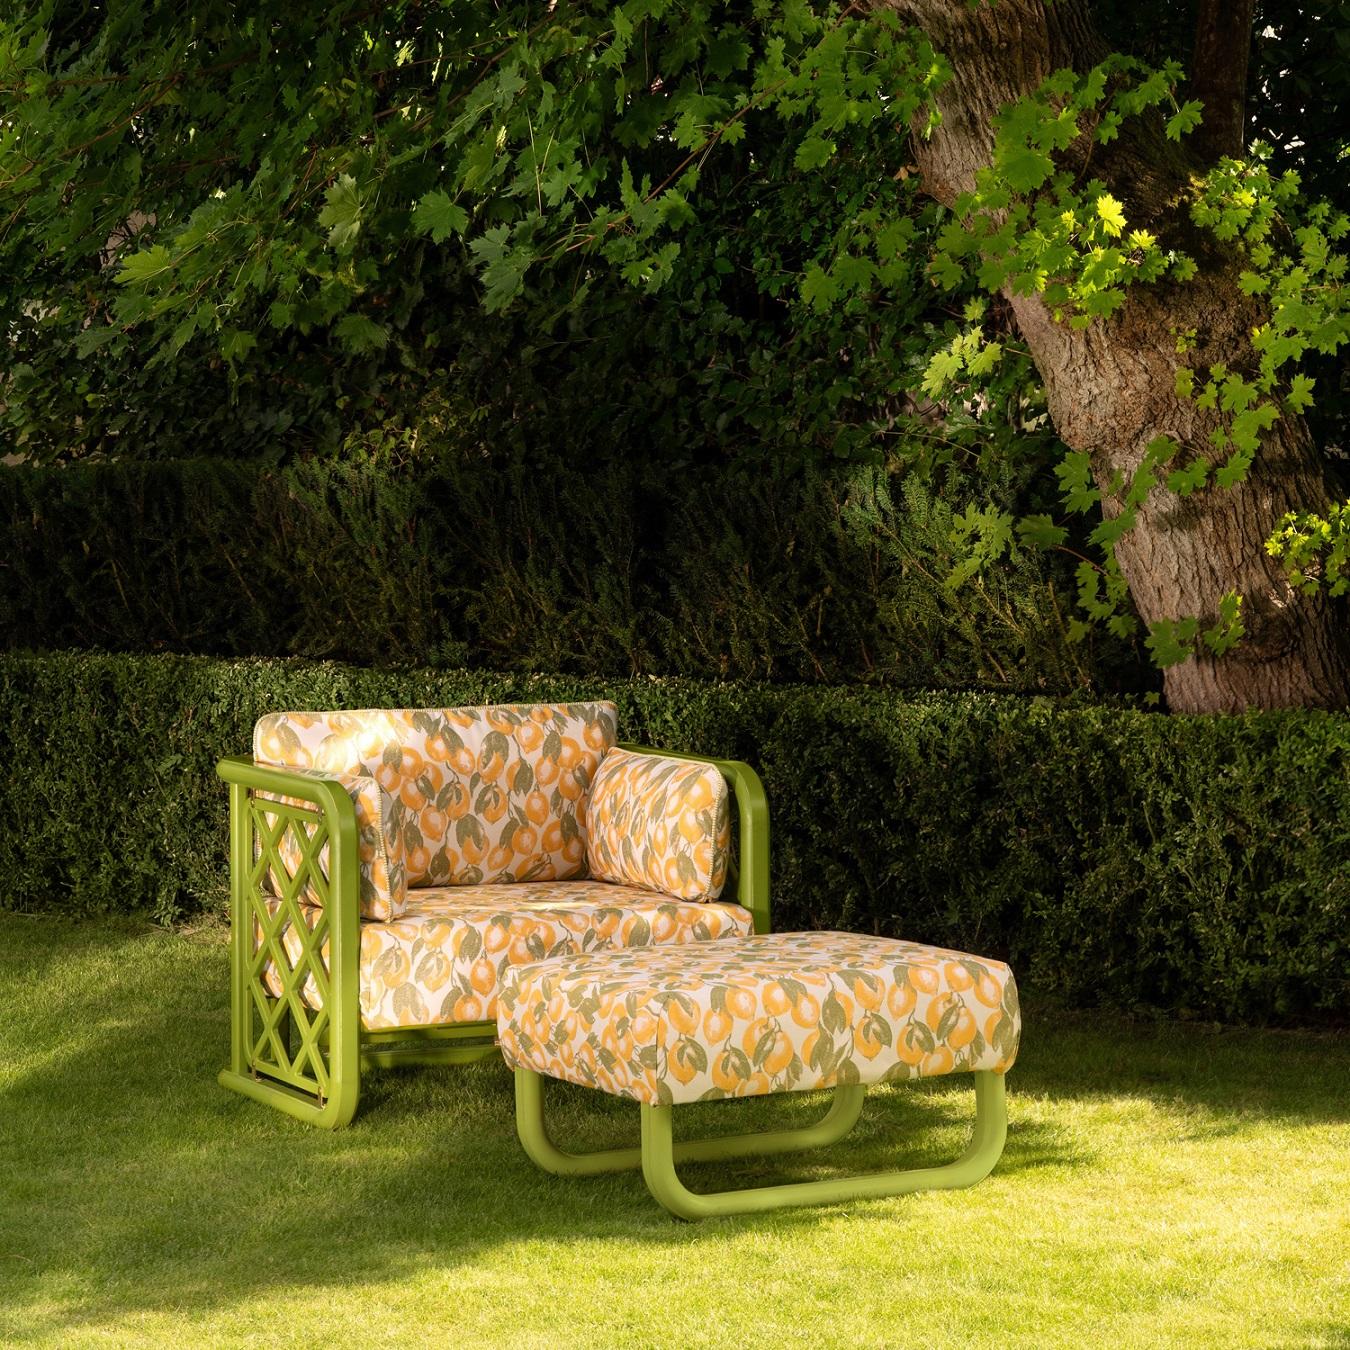 Lacquered French Garden Large Armchair designed by Pierre Gonalons - ref. 214 For Sale